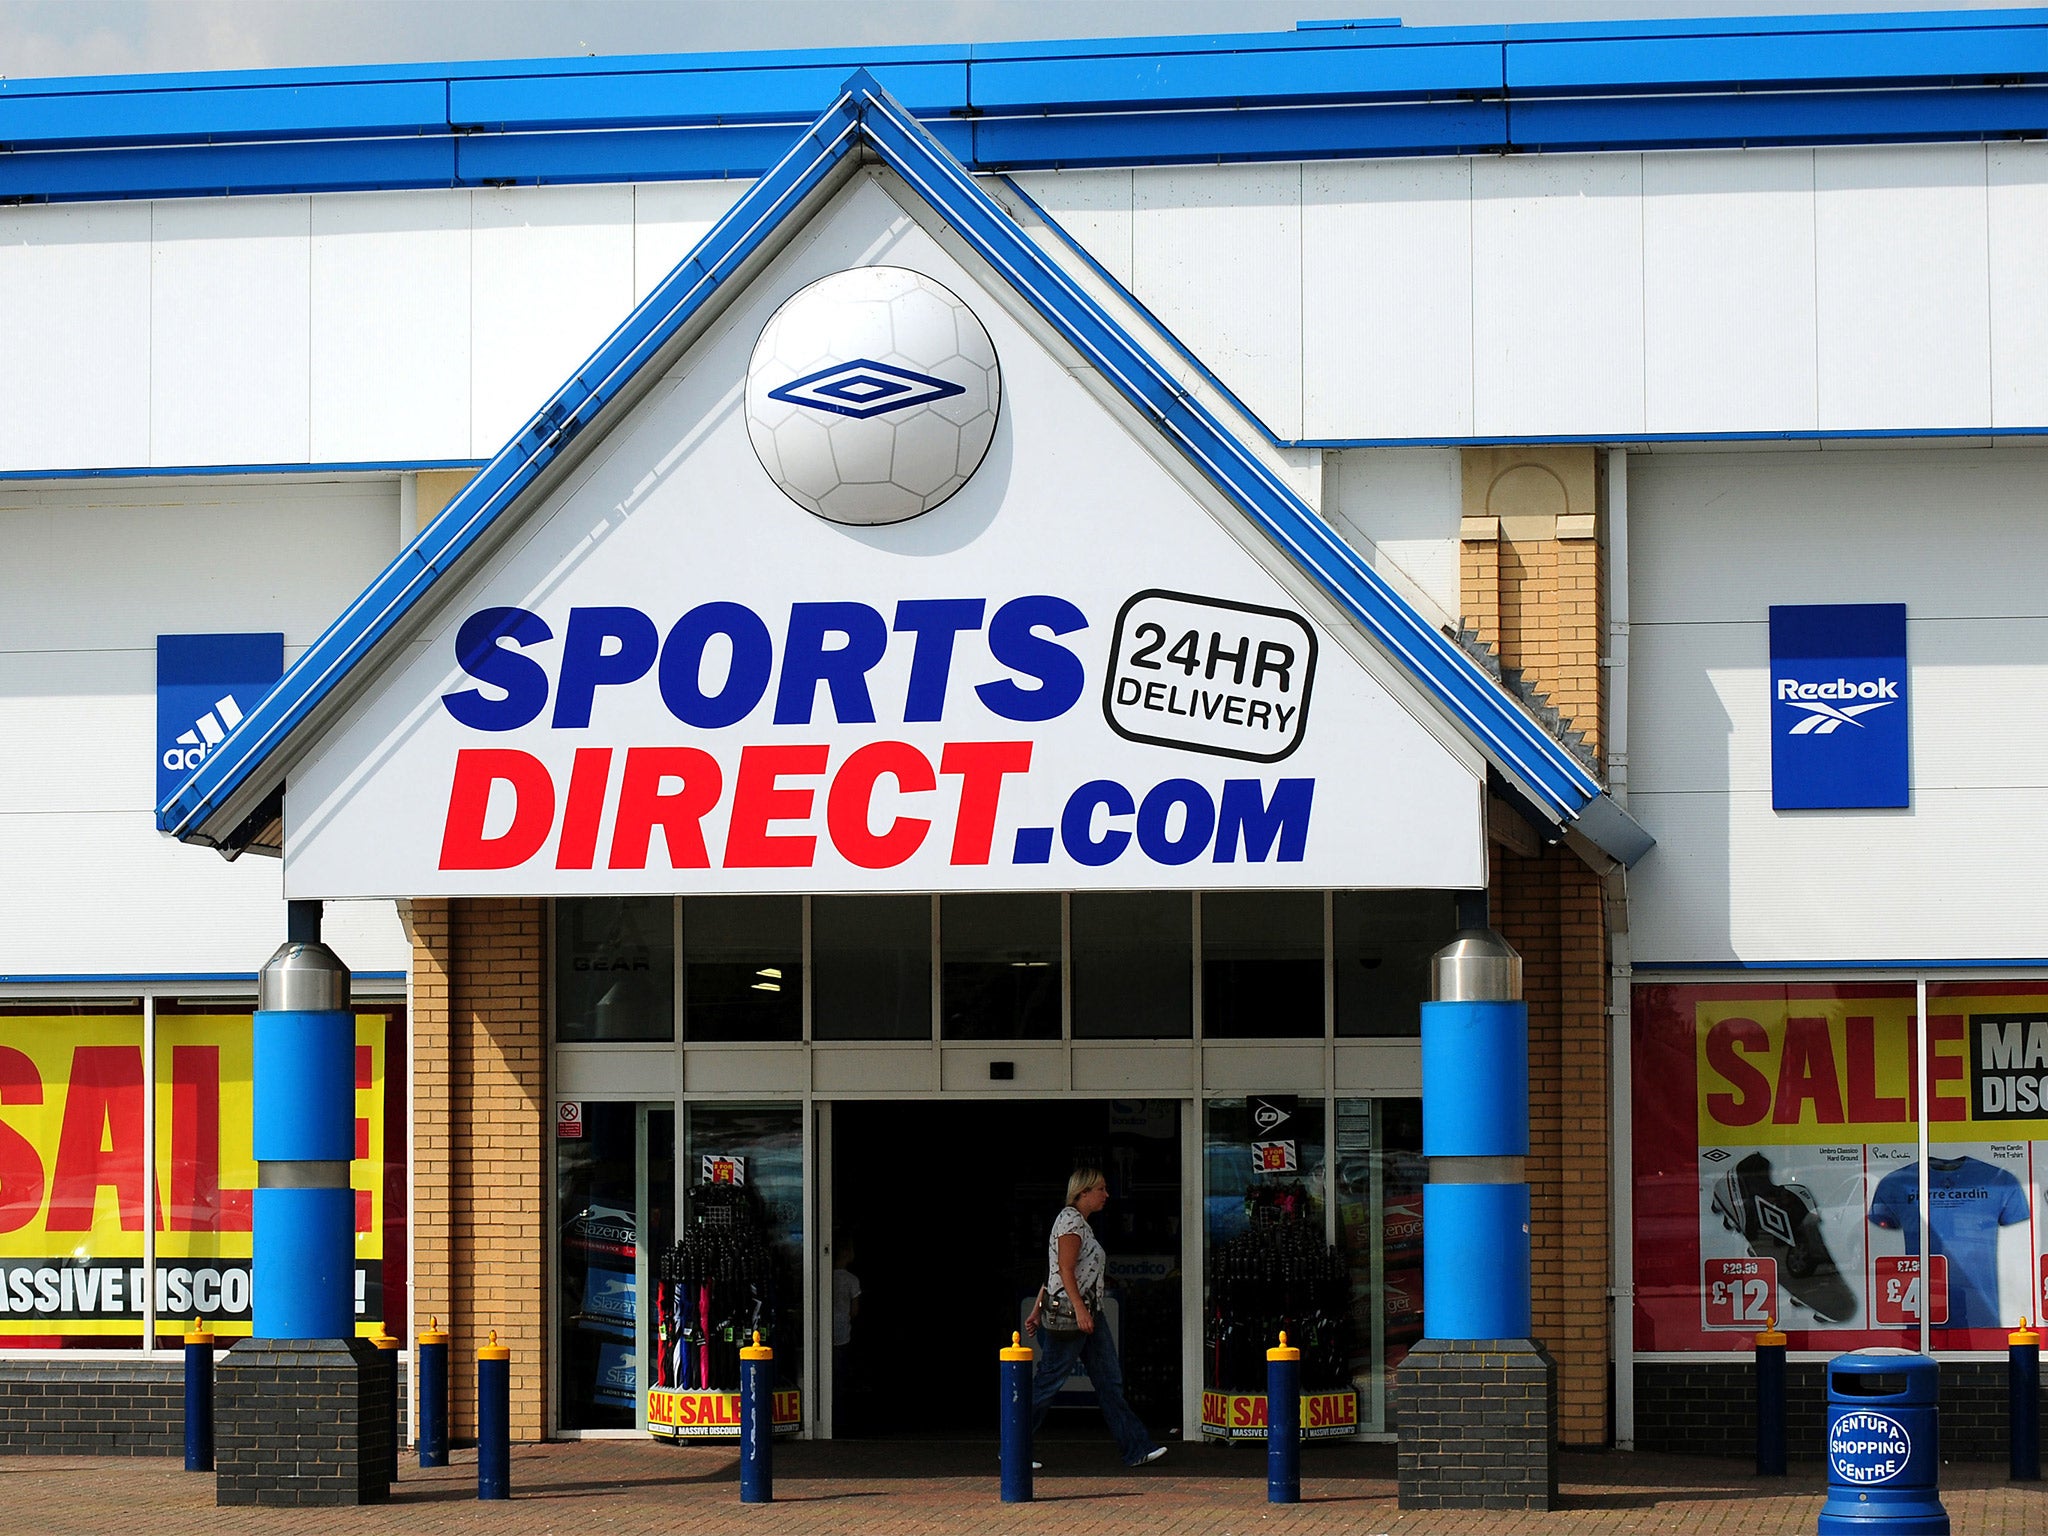 Nearly 90 per cent of Sports Direct’s staff are on zero-hours contracts